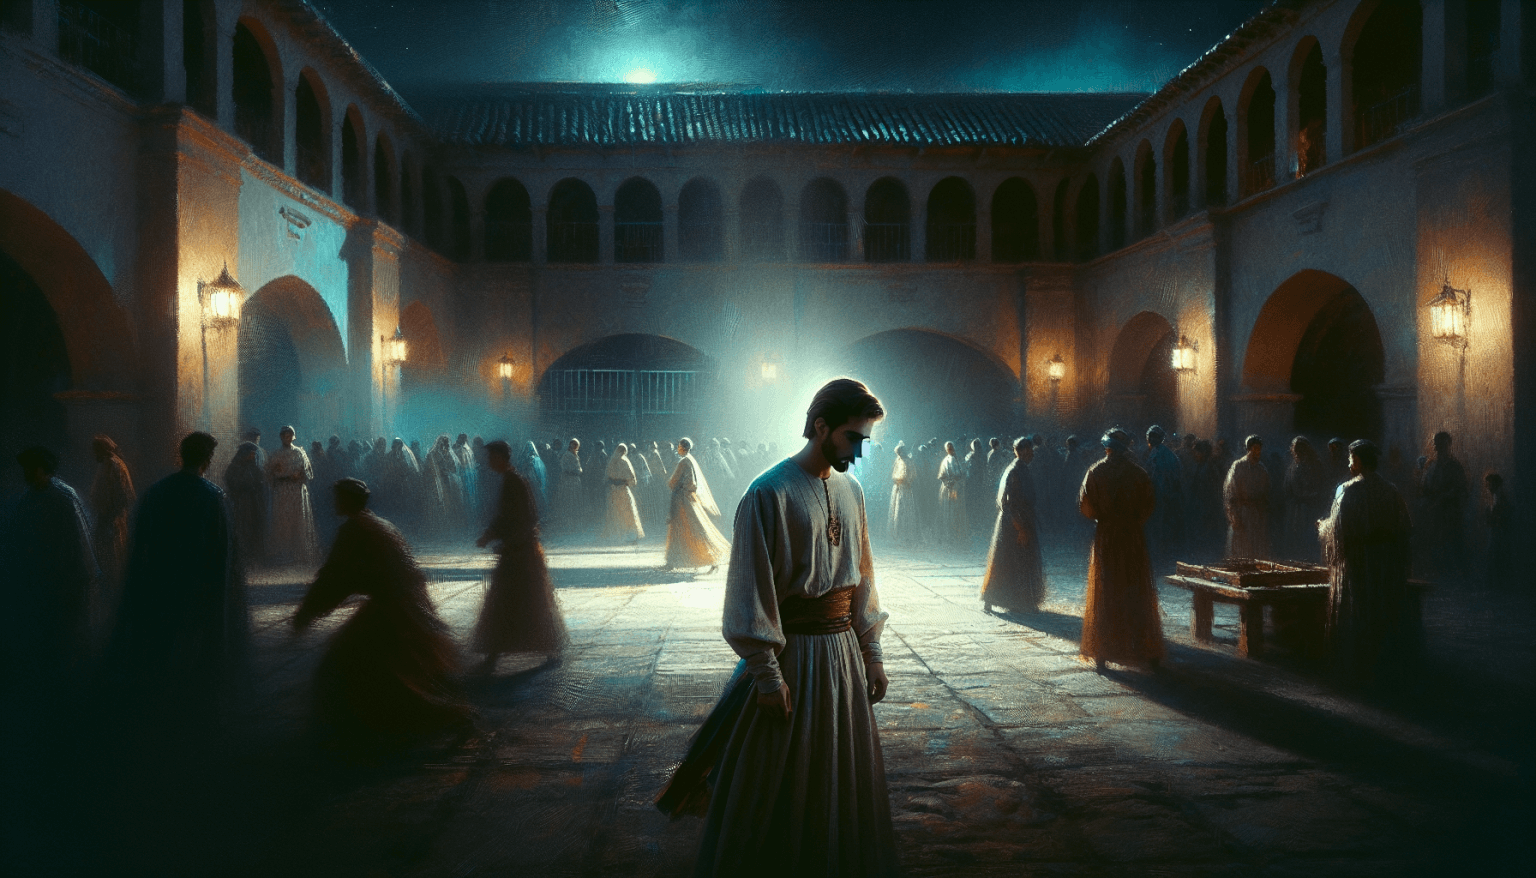 An emotional scene at night depicting Pedro in a humble garment, standing in a dimly lit ancient courtyard, surrounded by ambiguous figures, as a rooster crows in the background, illustrating the Bibl